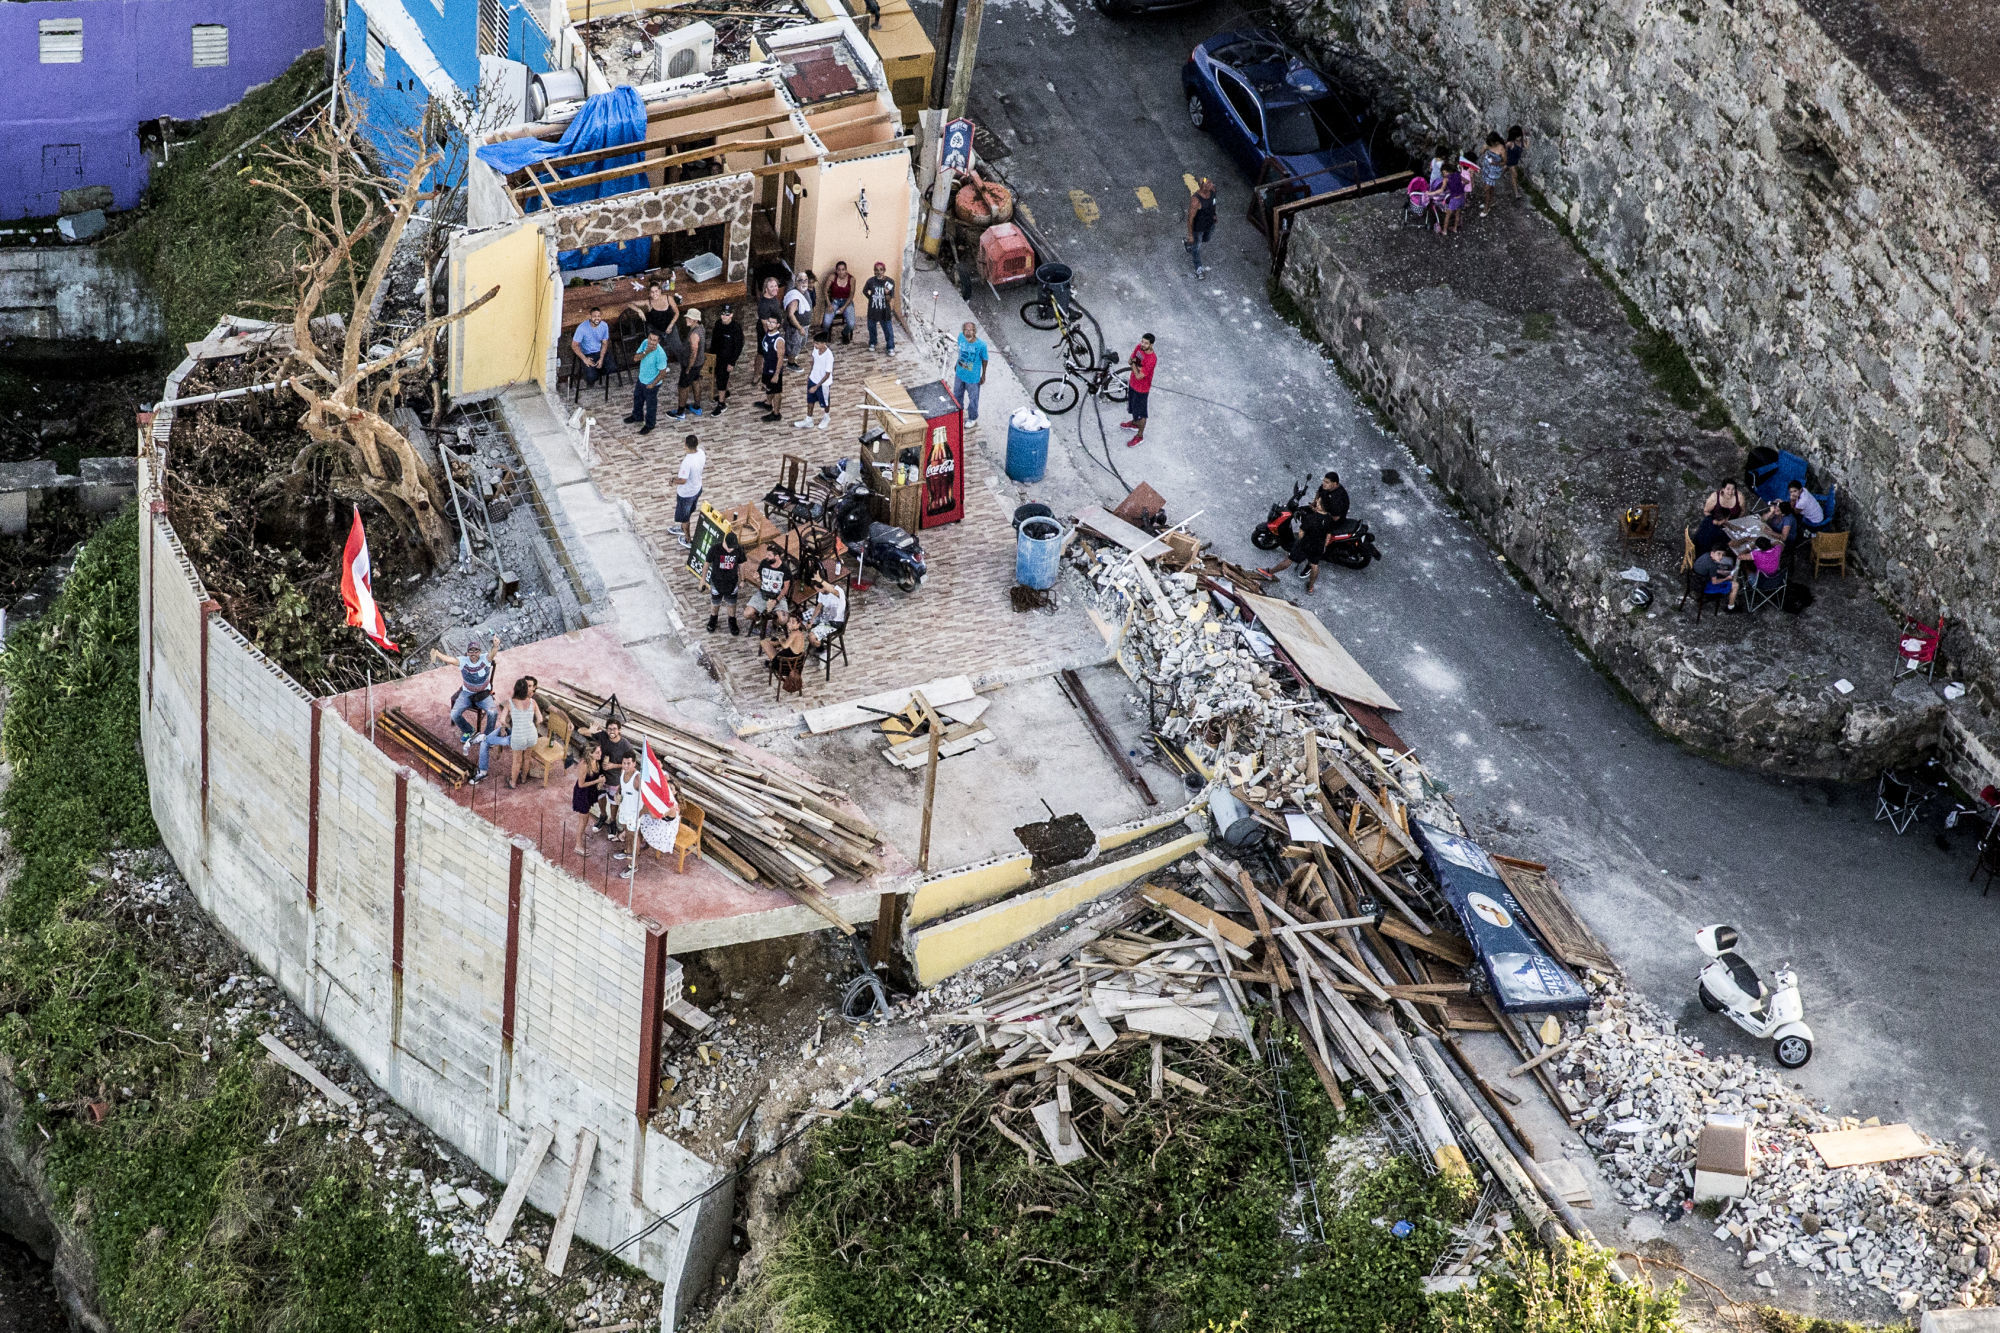 People stand in a bar damaged from Hurricane Maria in this aerial photograph taken above La Perla, San Juan, Puerto Rico, on Monday, Sept. 25, 2017. Photographer: Alex Wroblewski/Bloomberg